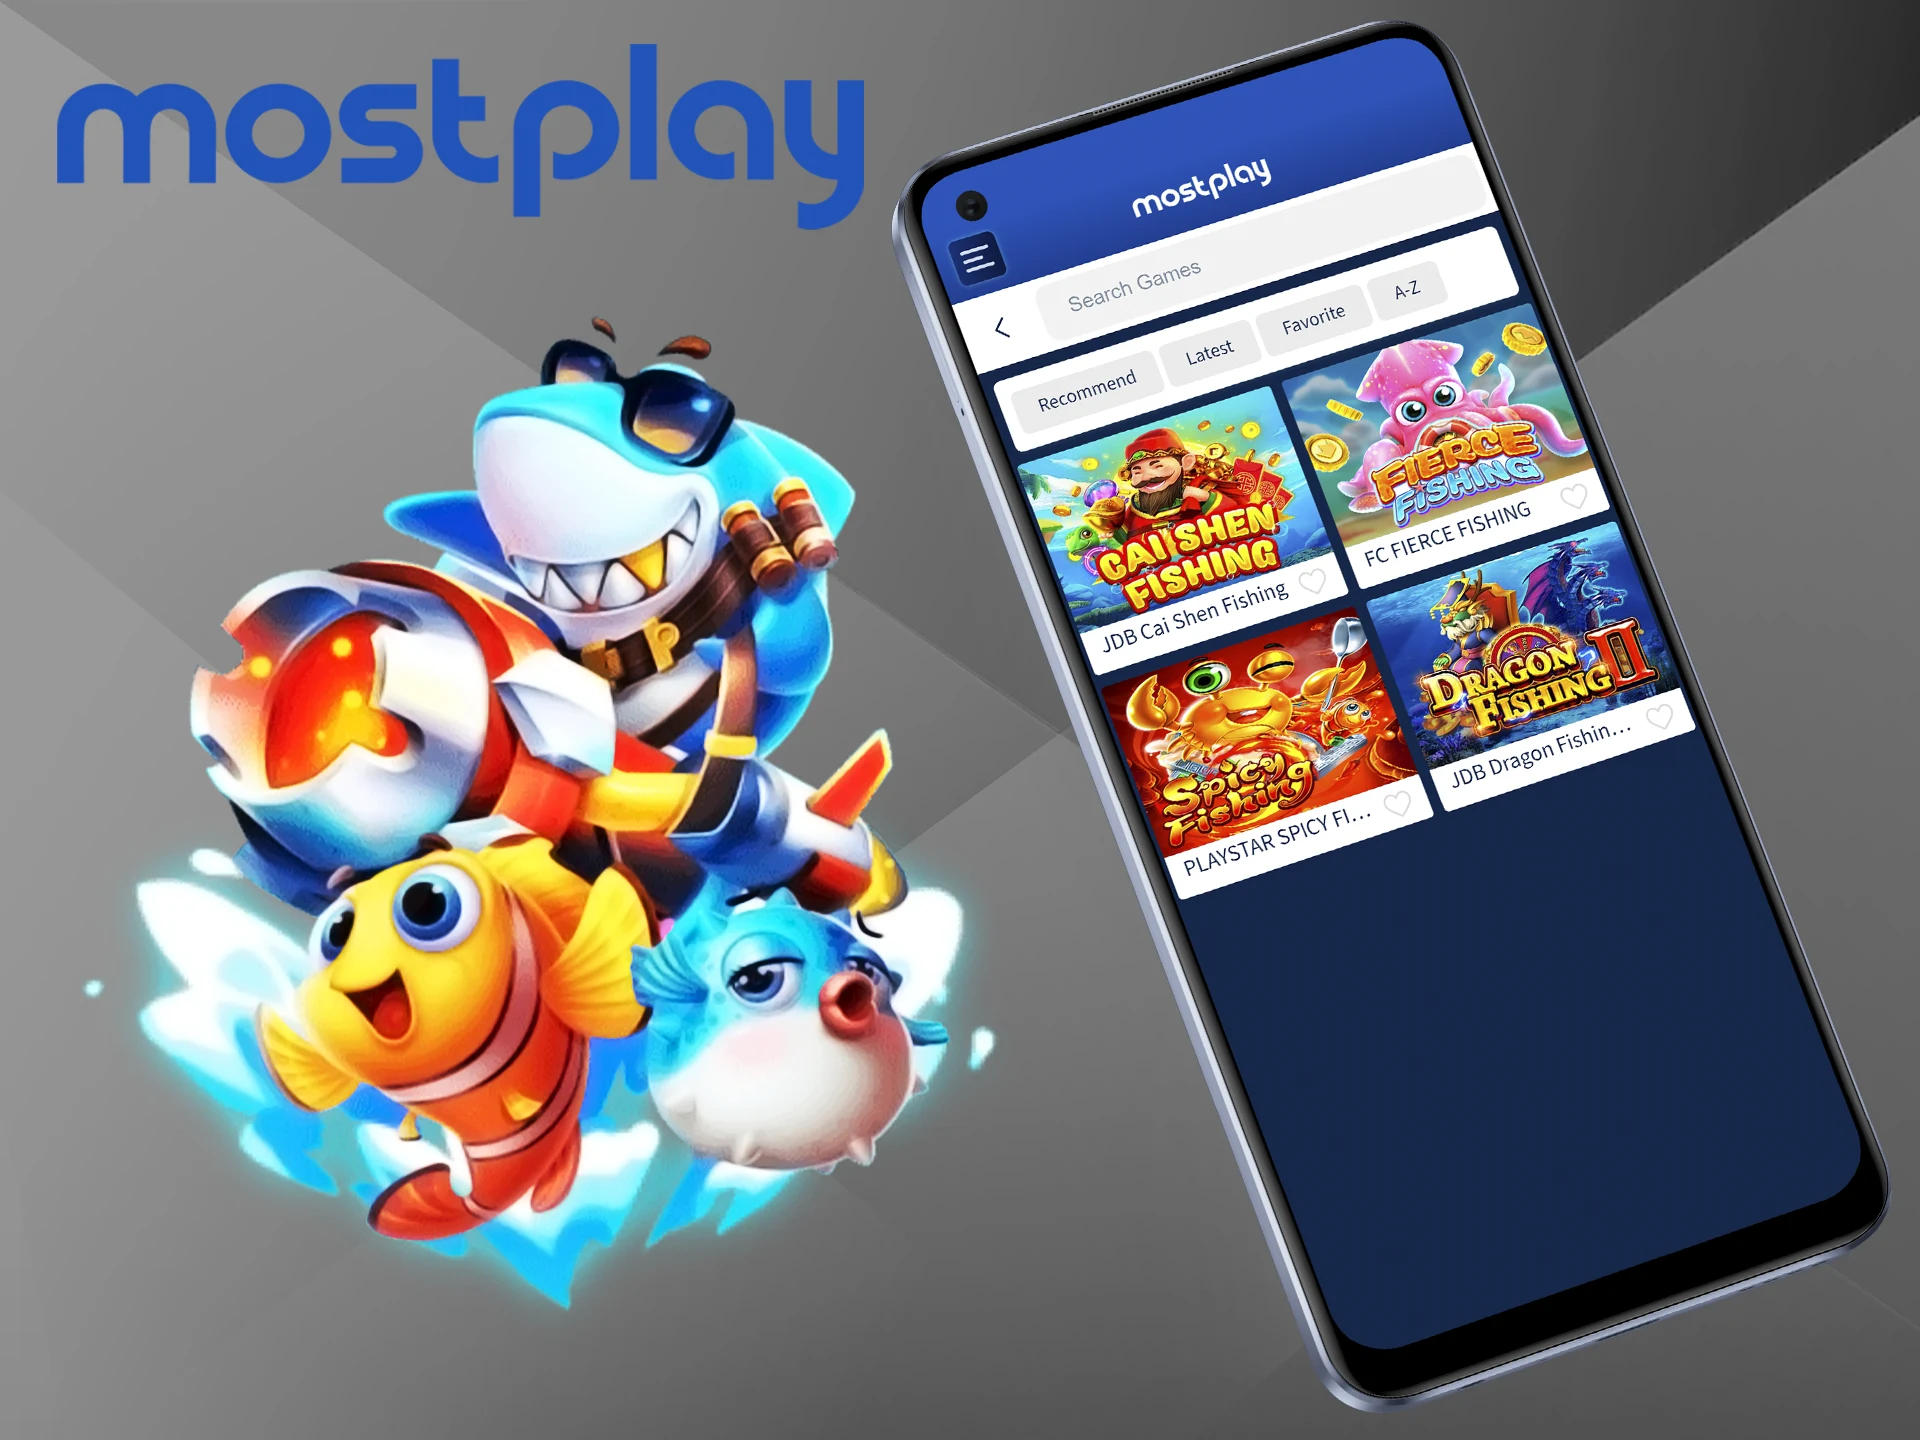 Find out what fishing games are popular at Mostplay.